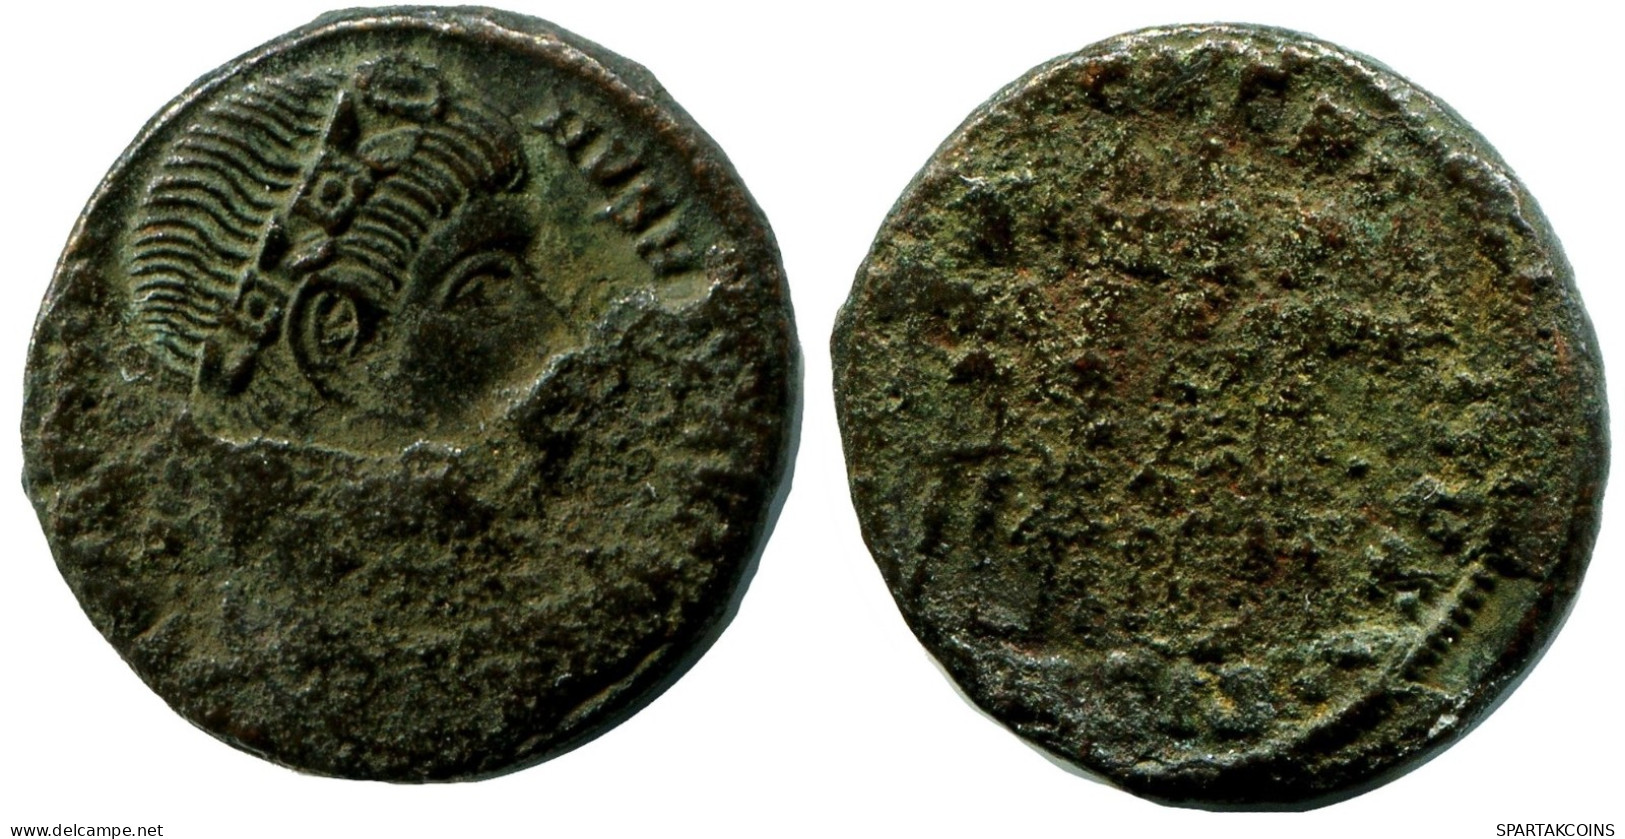 CONSTANTINE I MINTED IN FROM THE ROYAL ONTARIO MUSEUM #ANC11085.14.F.A - The Christian Empire (307 AD To 363 AD)